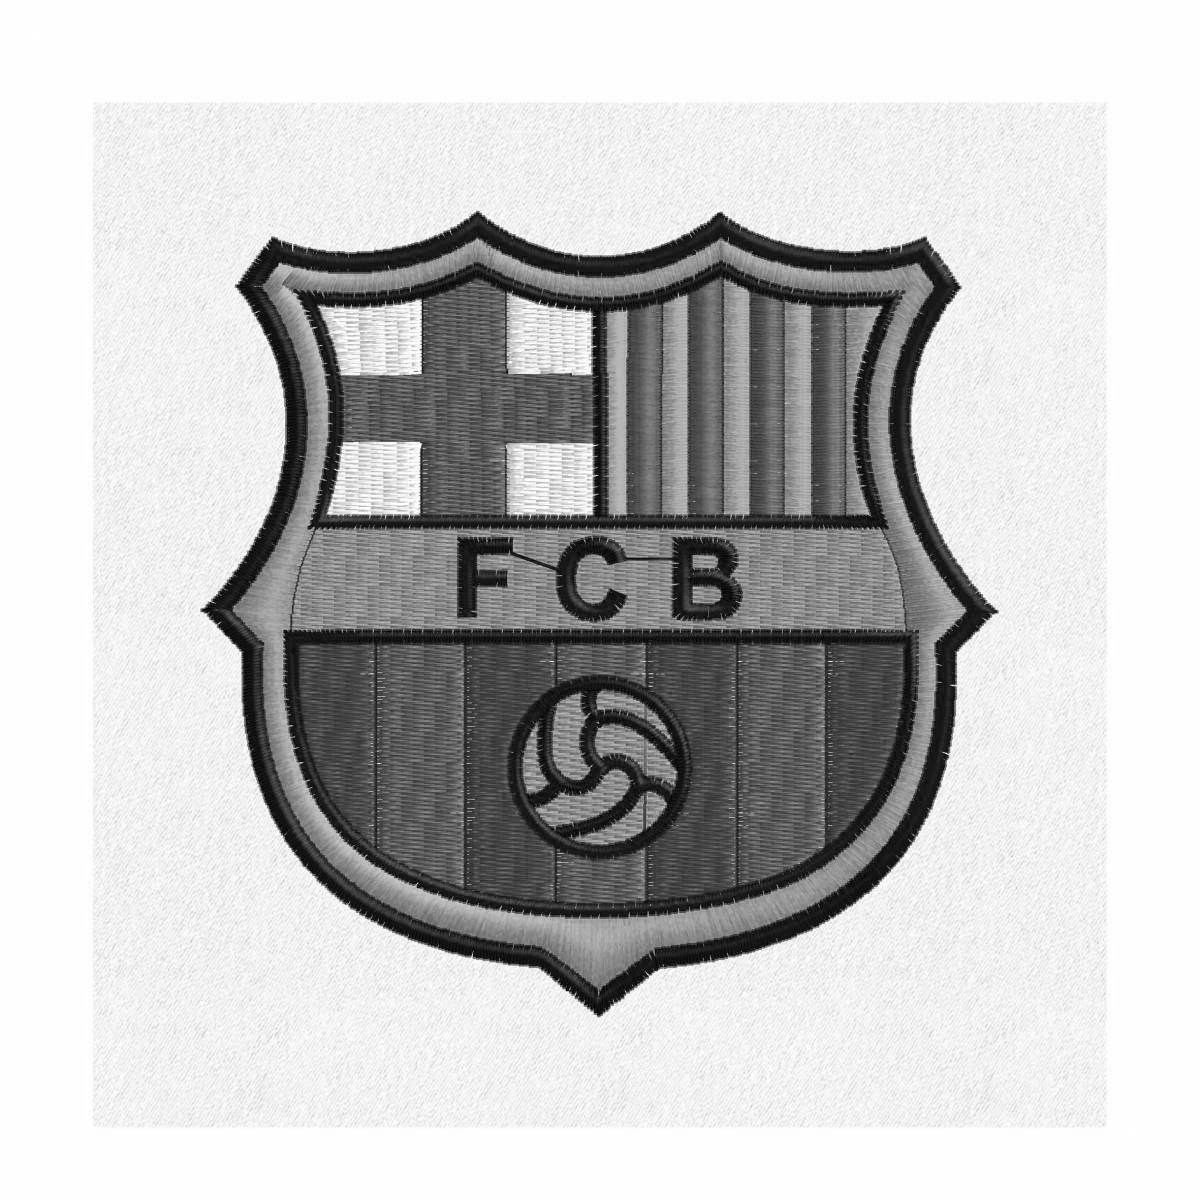 Great coloring of the emblem of barcelona